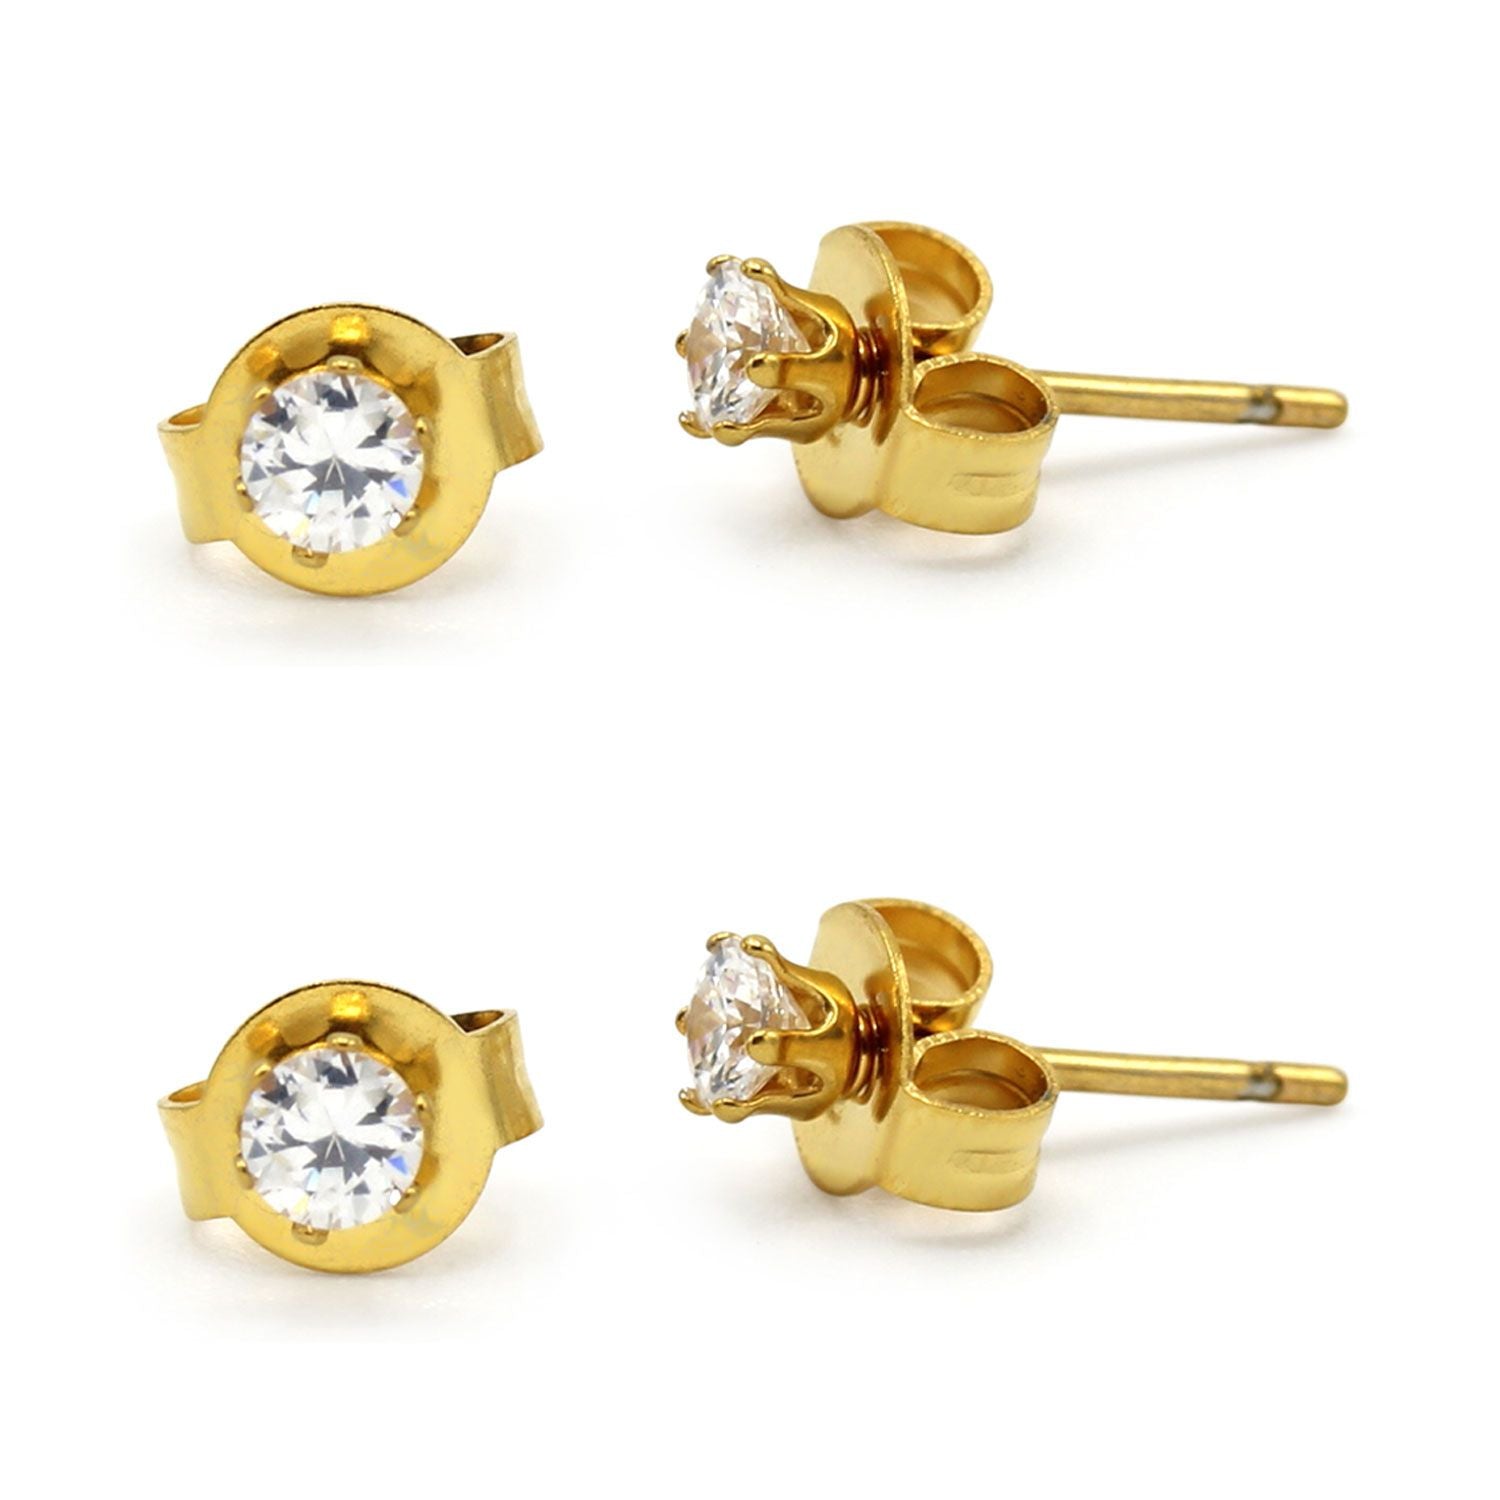 Buy second stud earrings set in India @ Limeroad | page 2